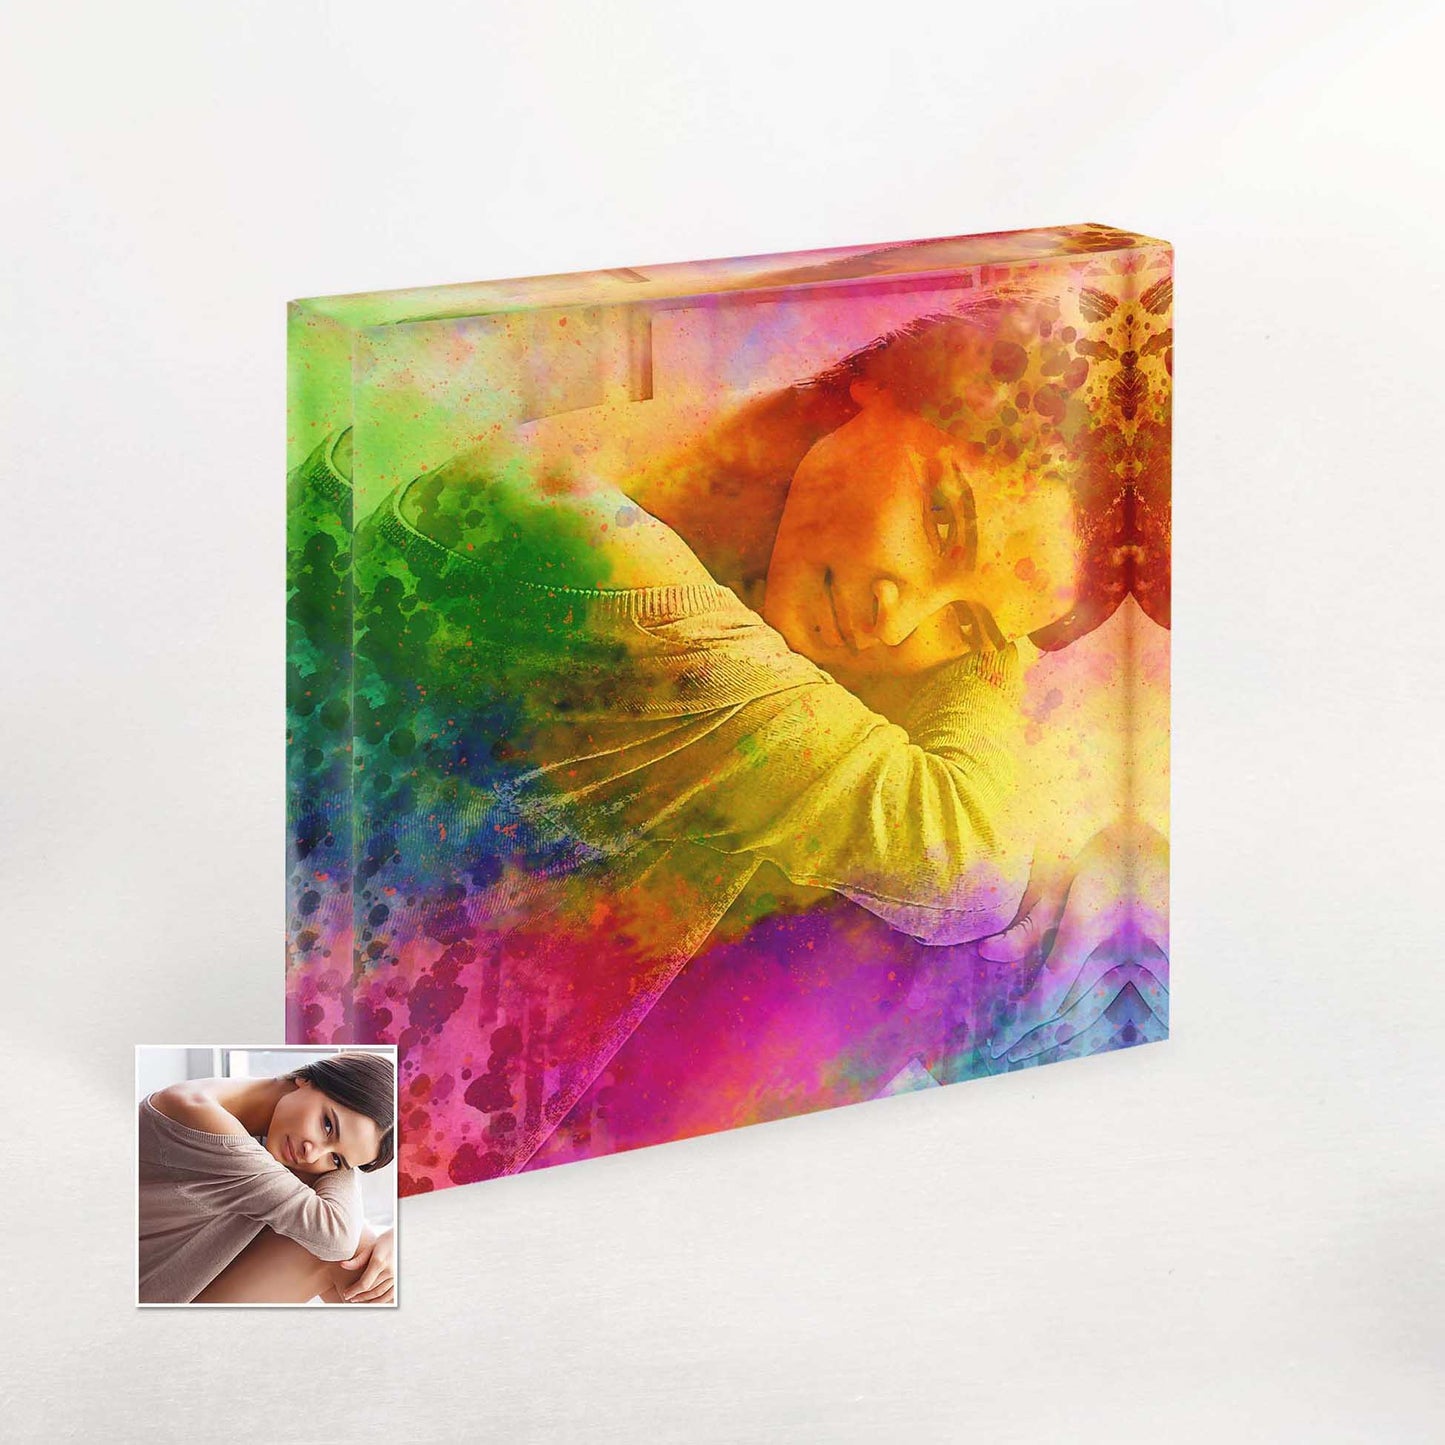 Immerse yourself in the cool and refreshing vibes of our Personalised Splash of Colours Acrylic Block Photo. The carefully selected palette and expertly blended hues create a sense of tranquility and serenity, making it a perfect addition to any relaxation space.